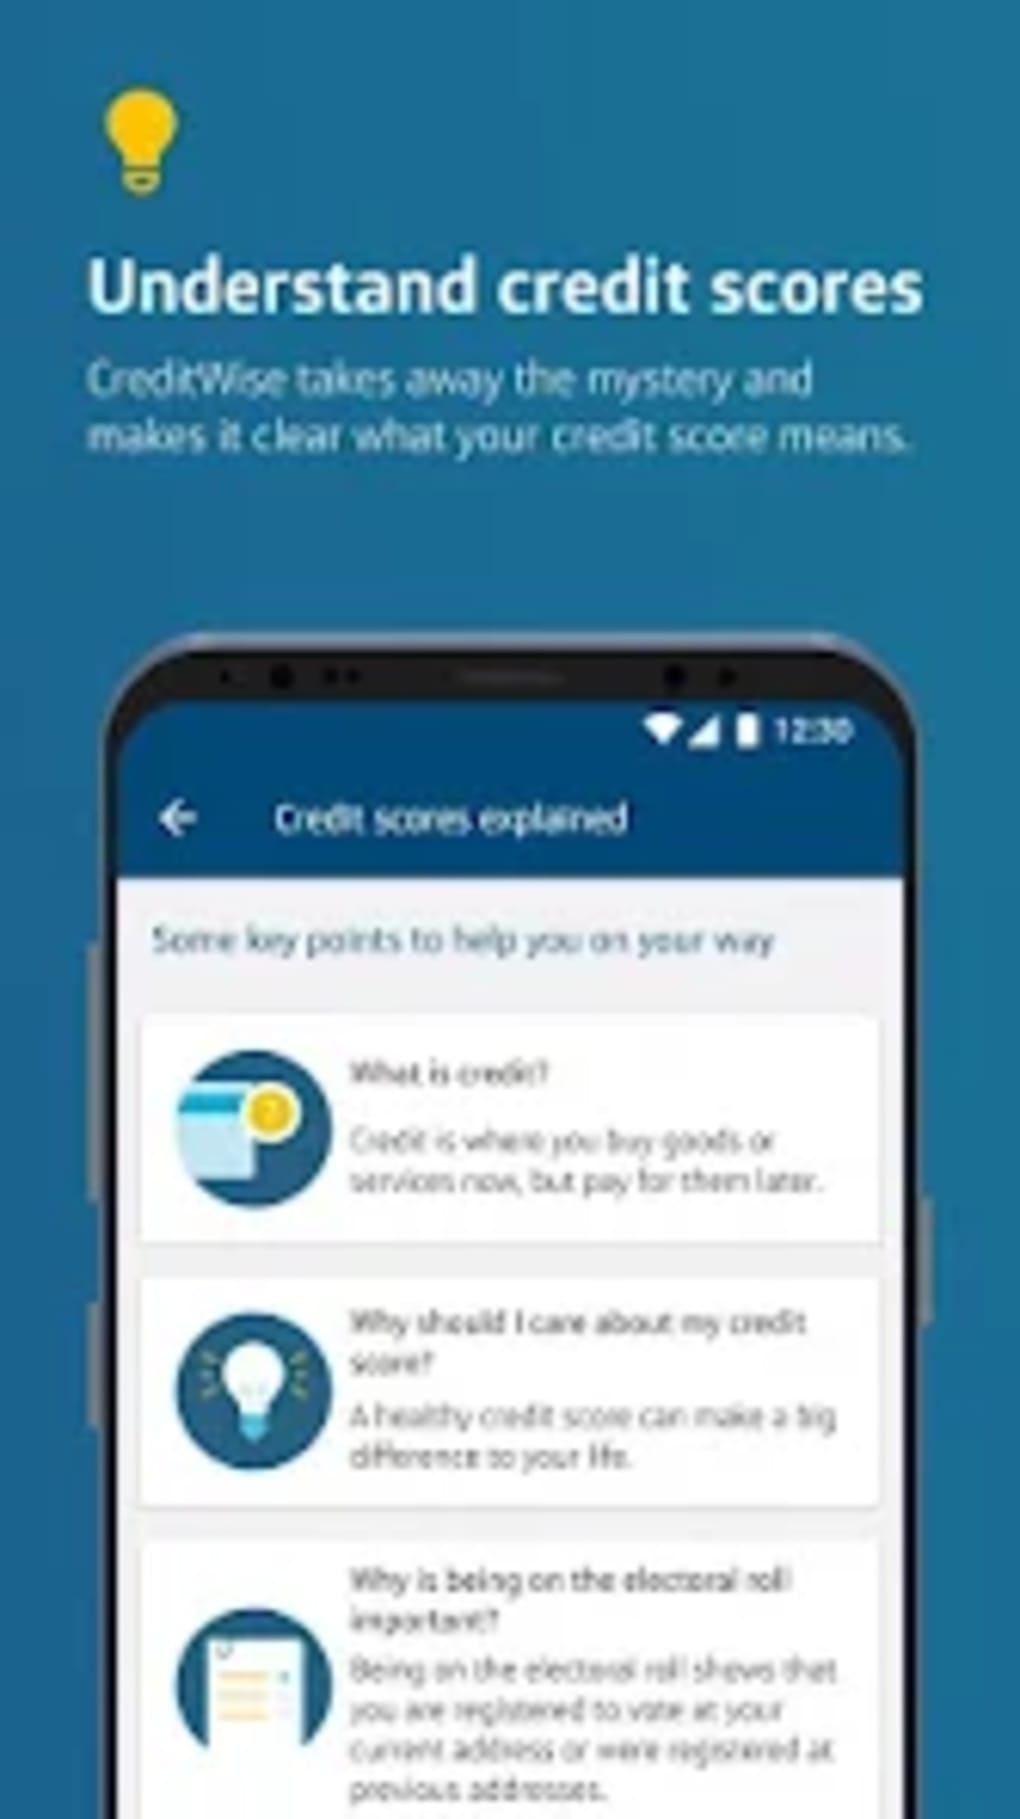 creditwise-from-capital-one-android